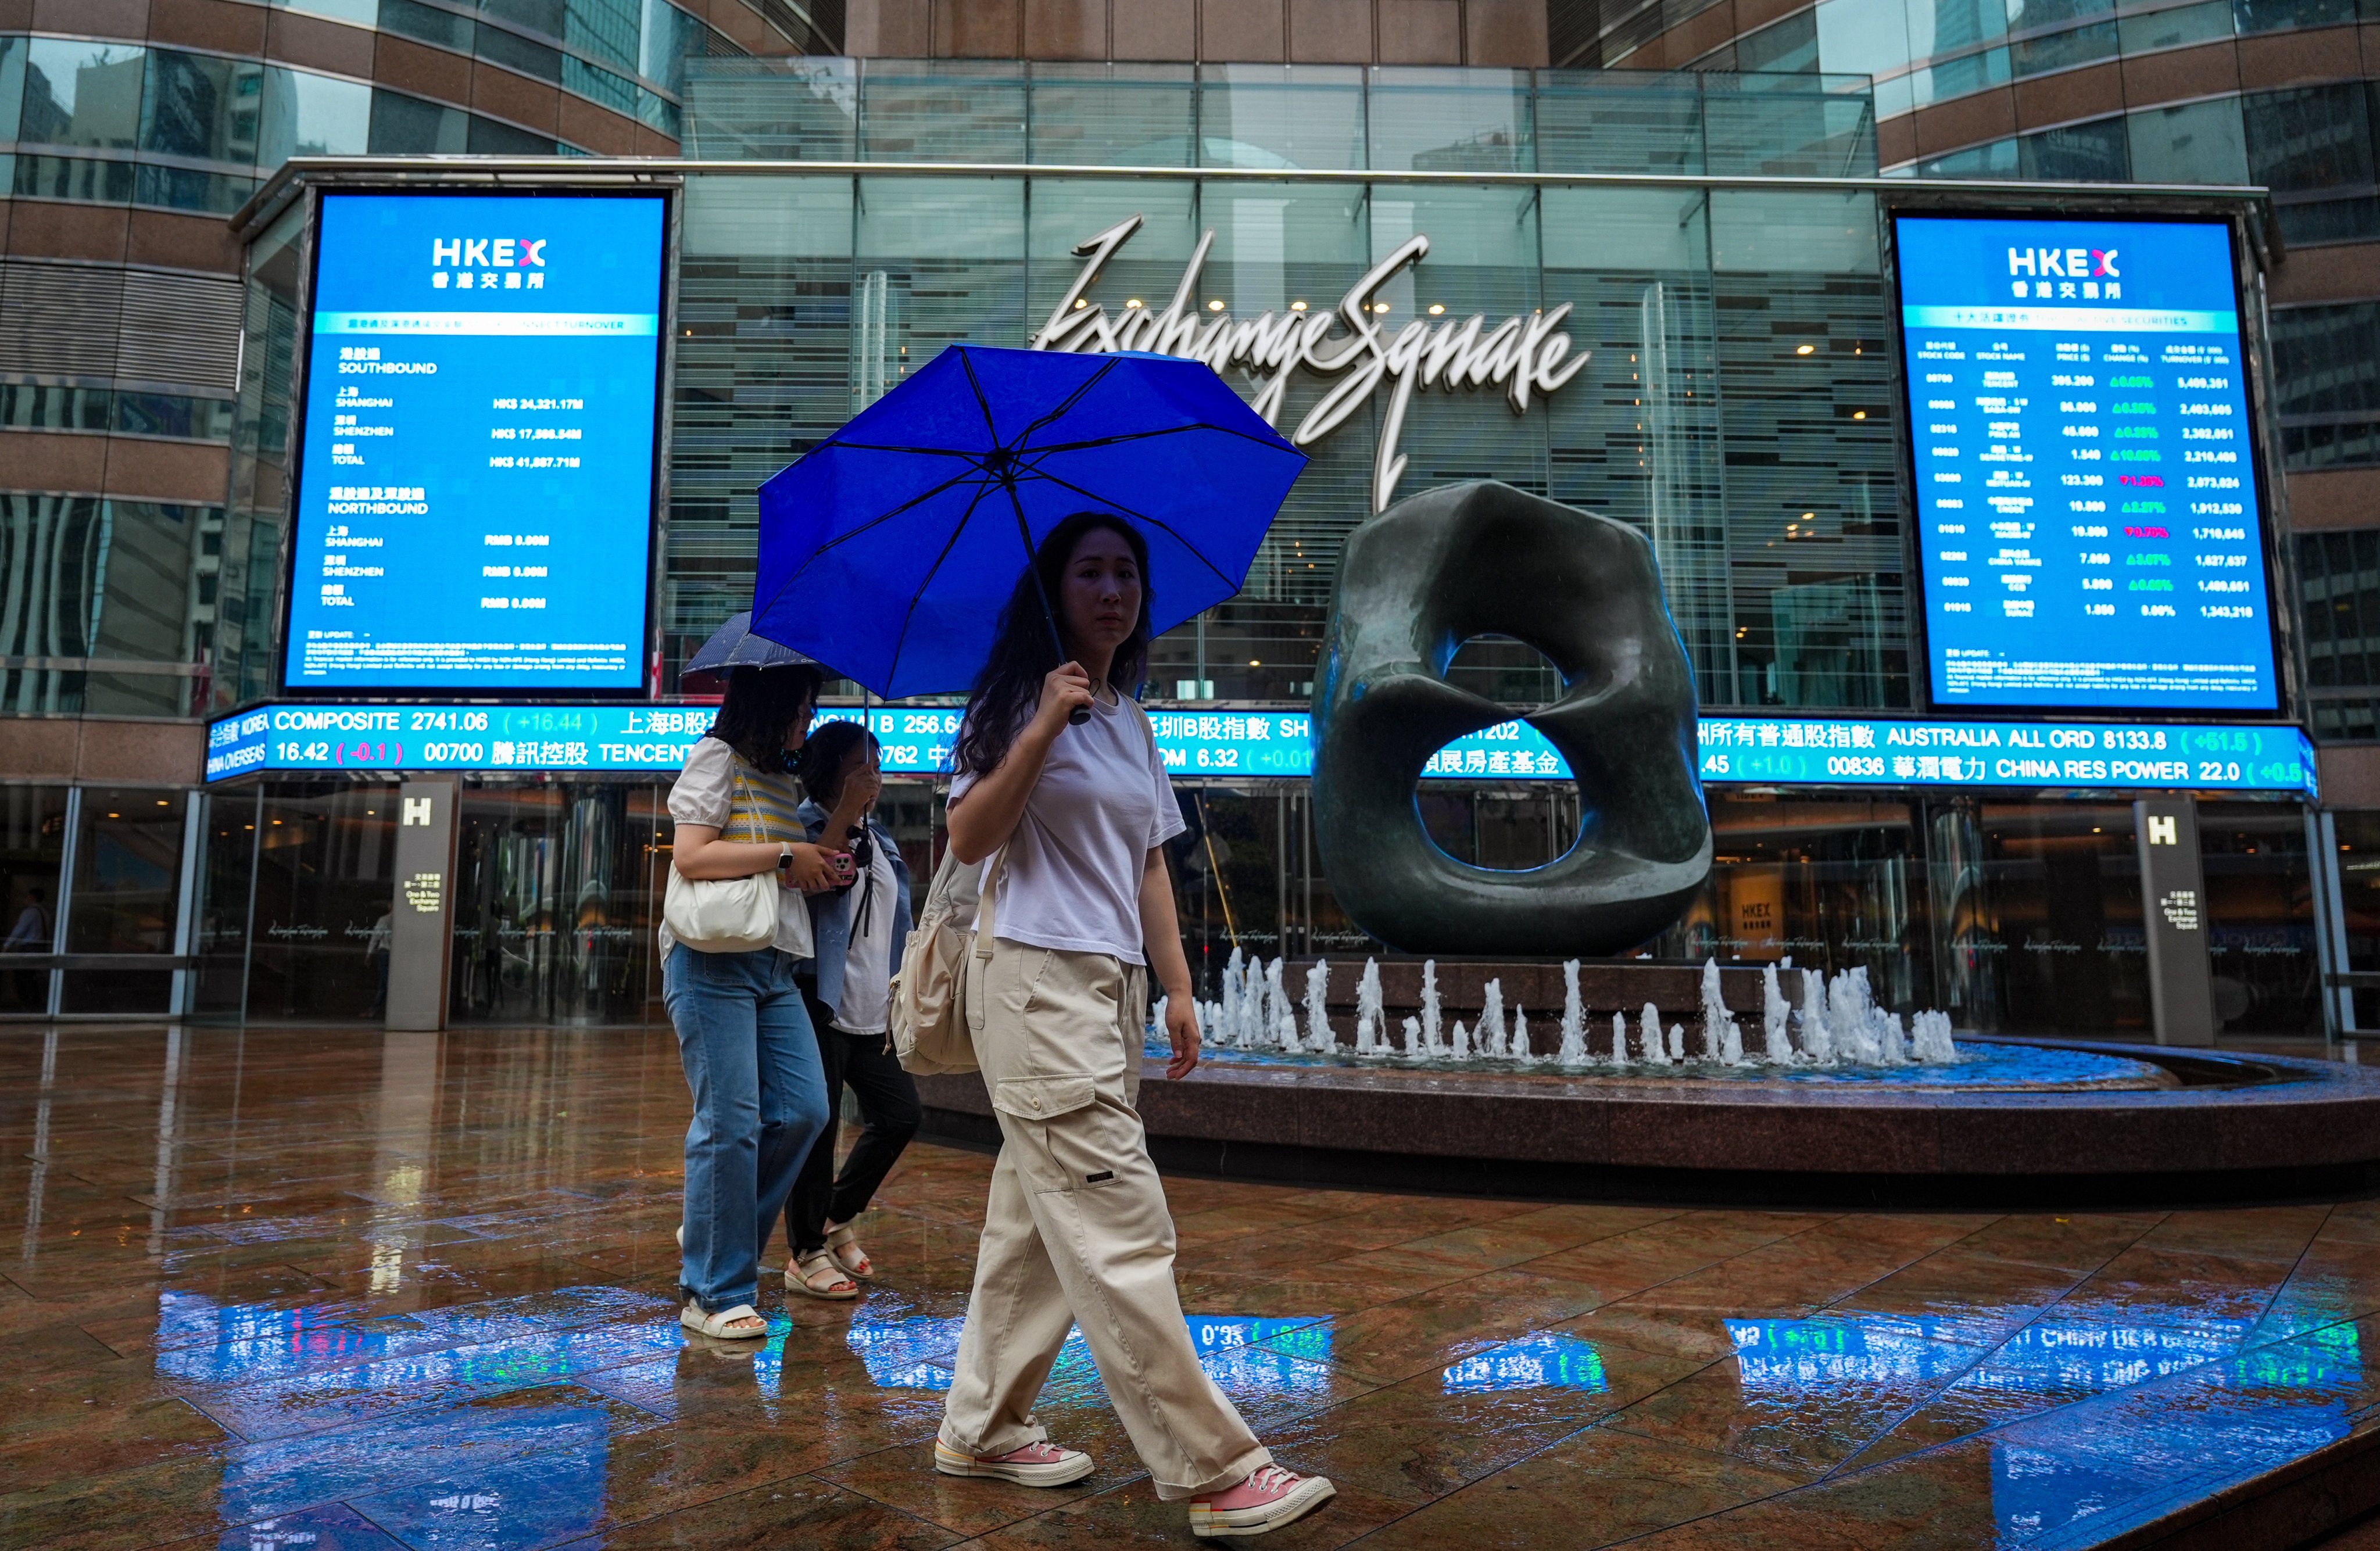 Pedestrians walk past Exchange Square in Central amid rainy and gusty conditions. Photo: Eugene Lee